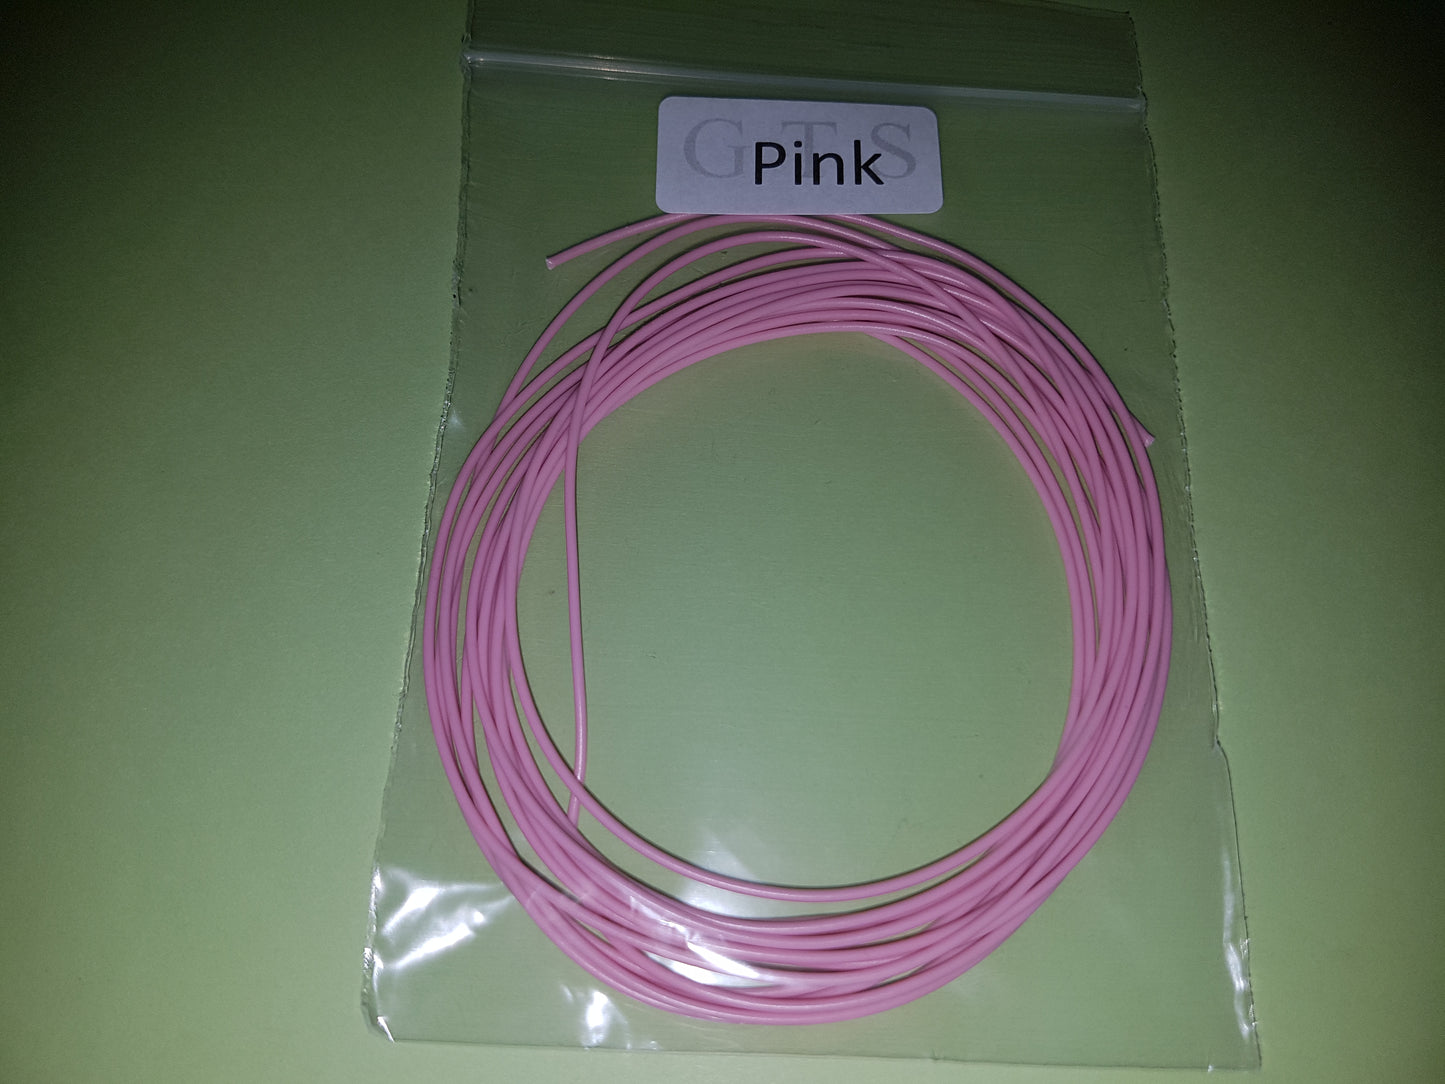 Electrical Cable - Model Railways - Multi Colours - 7 Strands @ 0.2mm - 3M